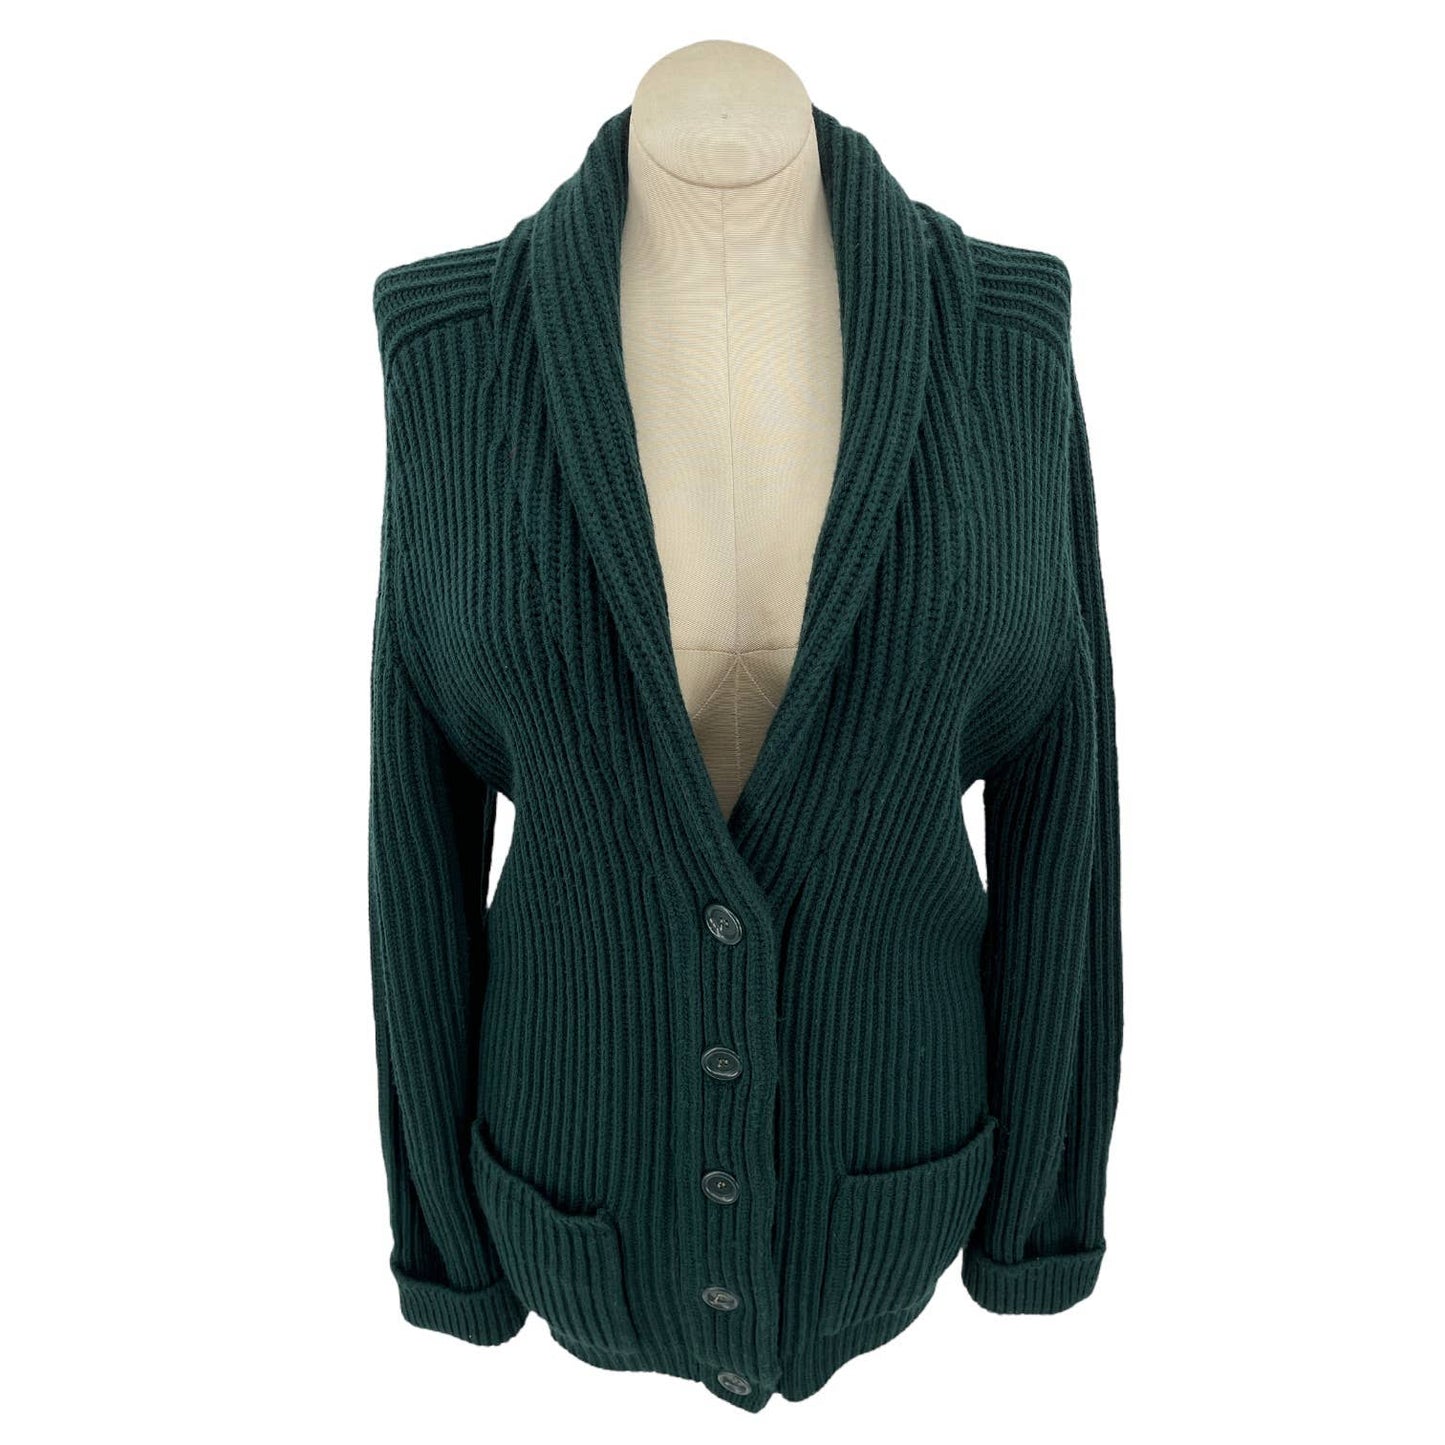 Vintage 70s Green Cardigan Sweater Vneck with Pockets Buttons Sears Size S M